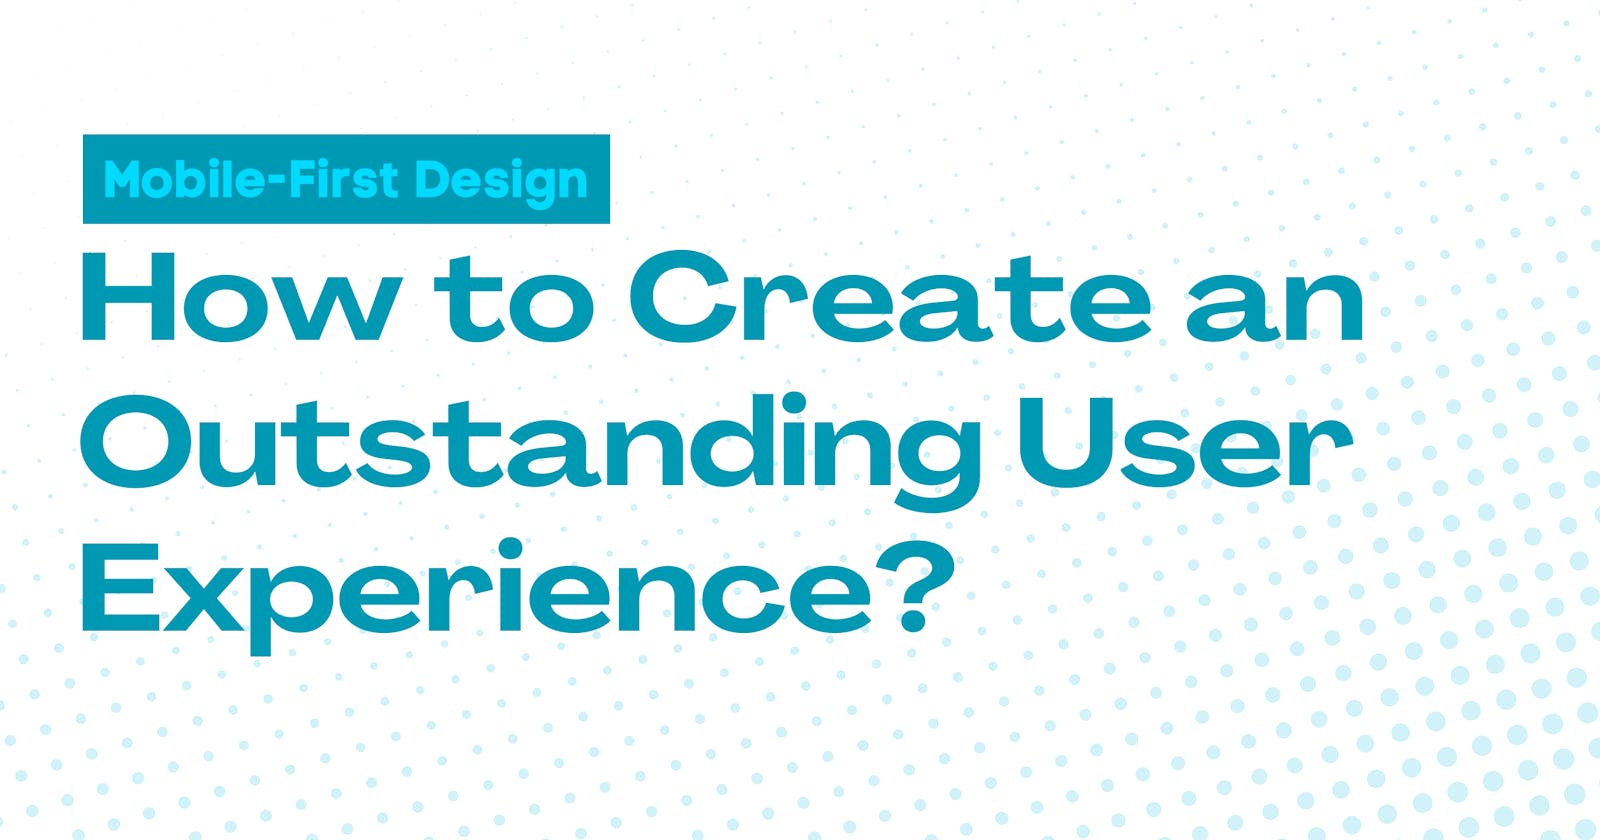 Mobile-First Design: How to Create an Outstanding User Experience?